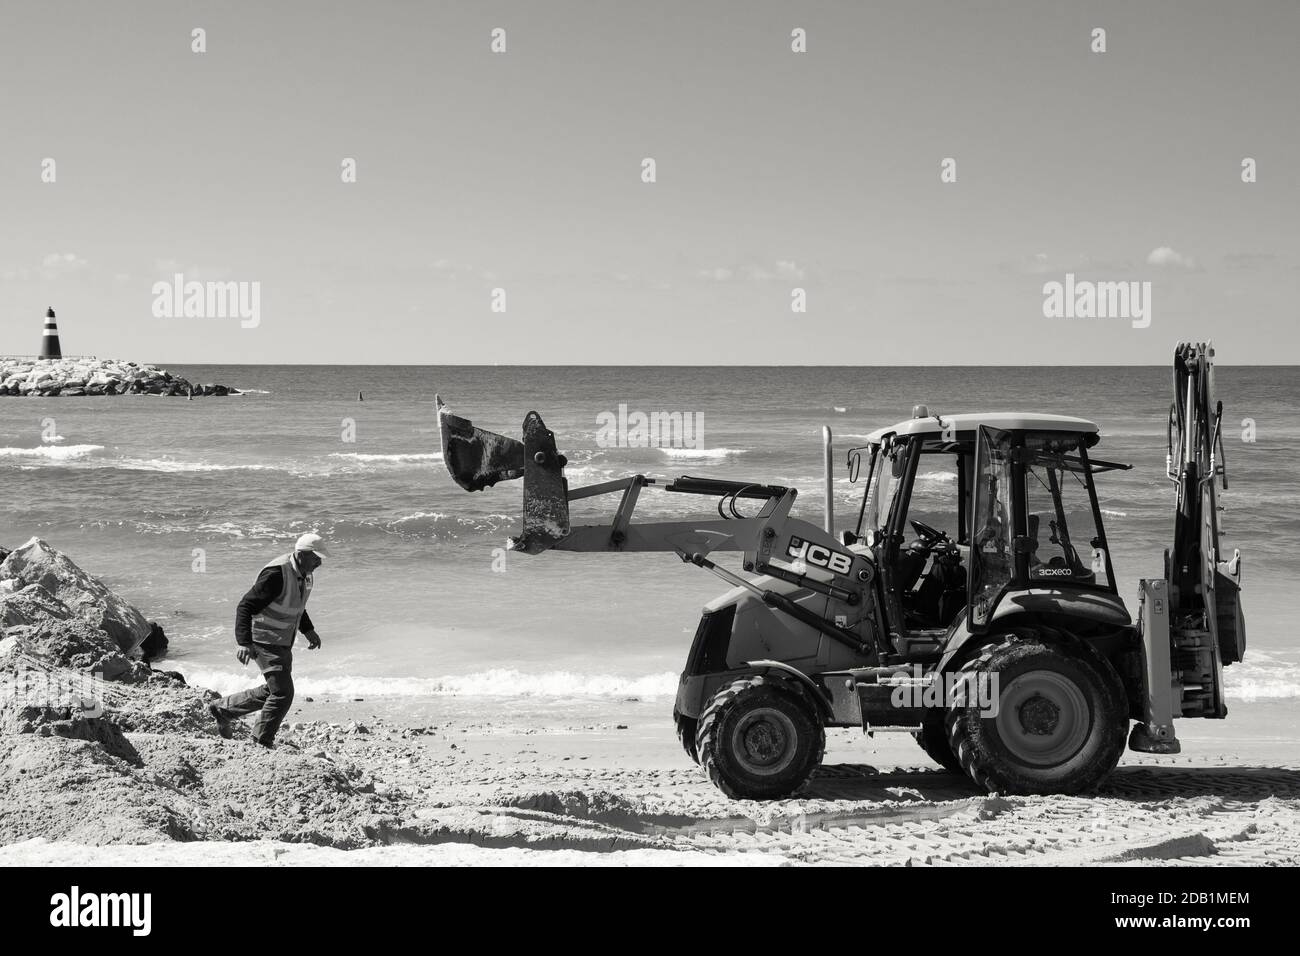 TEL AVIV, ISRAEL - MARCH 6, 2019: Beach industrial scene. Workers making repairs at the beach with digger. Black white photo Stock Photo